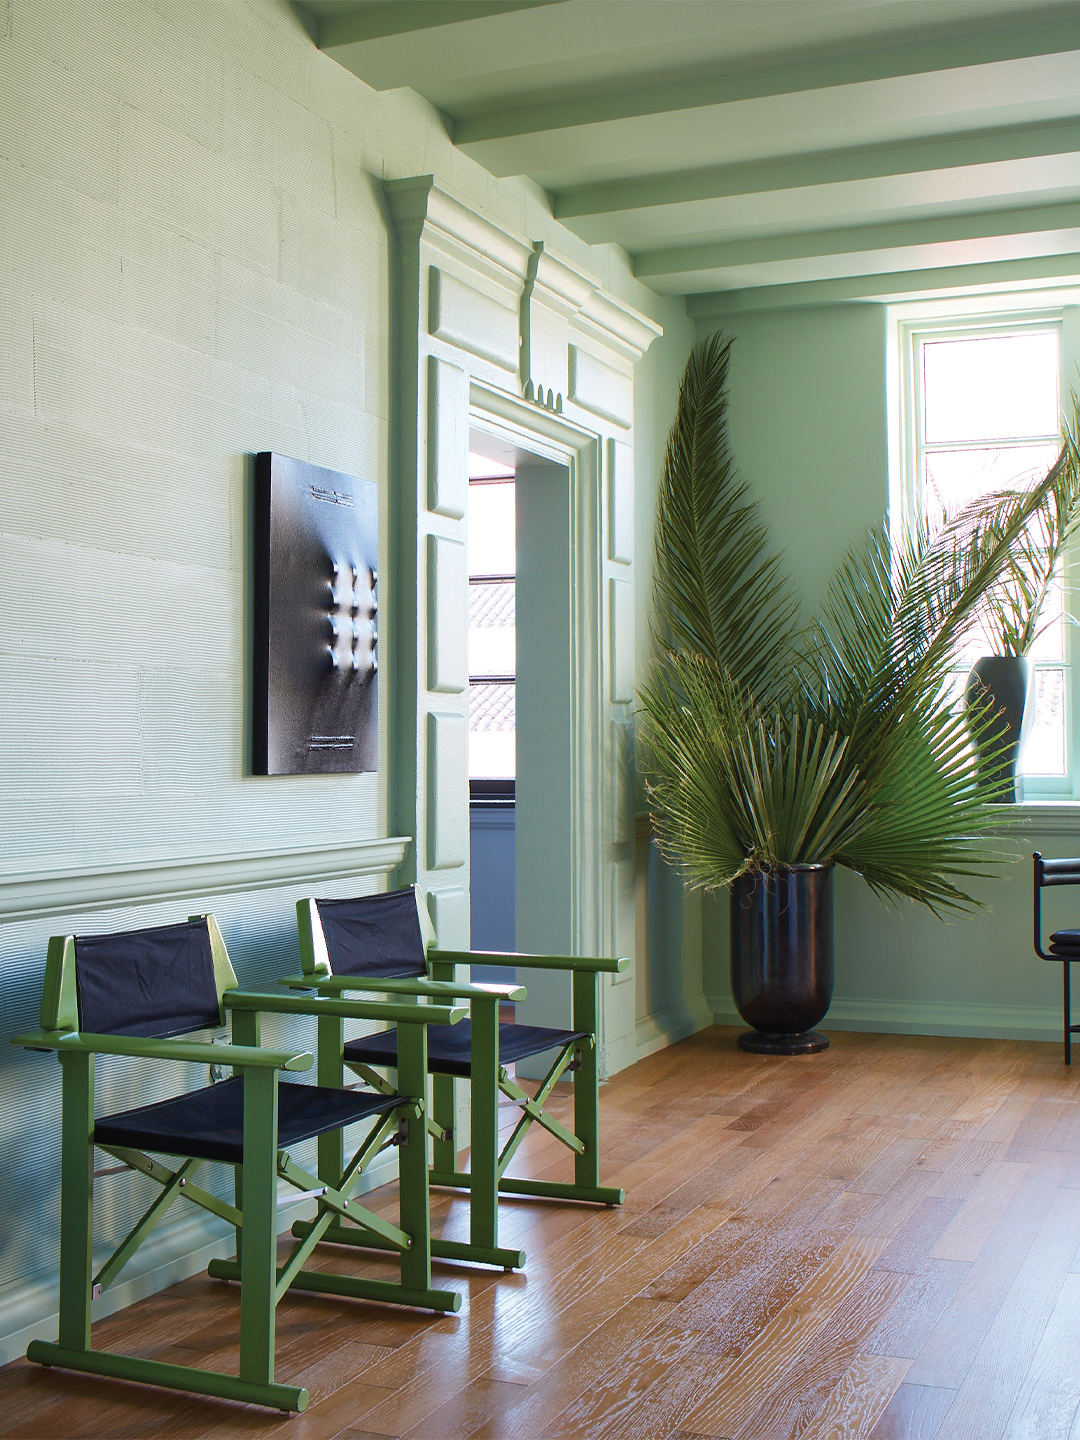 Kelly Wearstler paints for Farrow and Ball